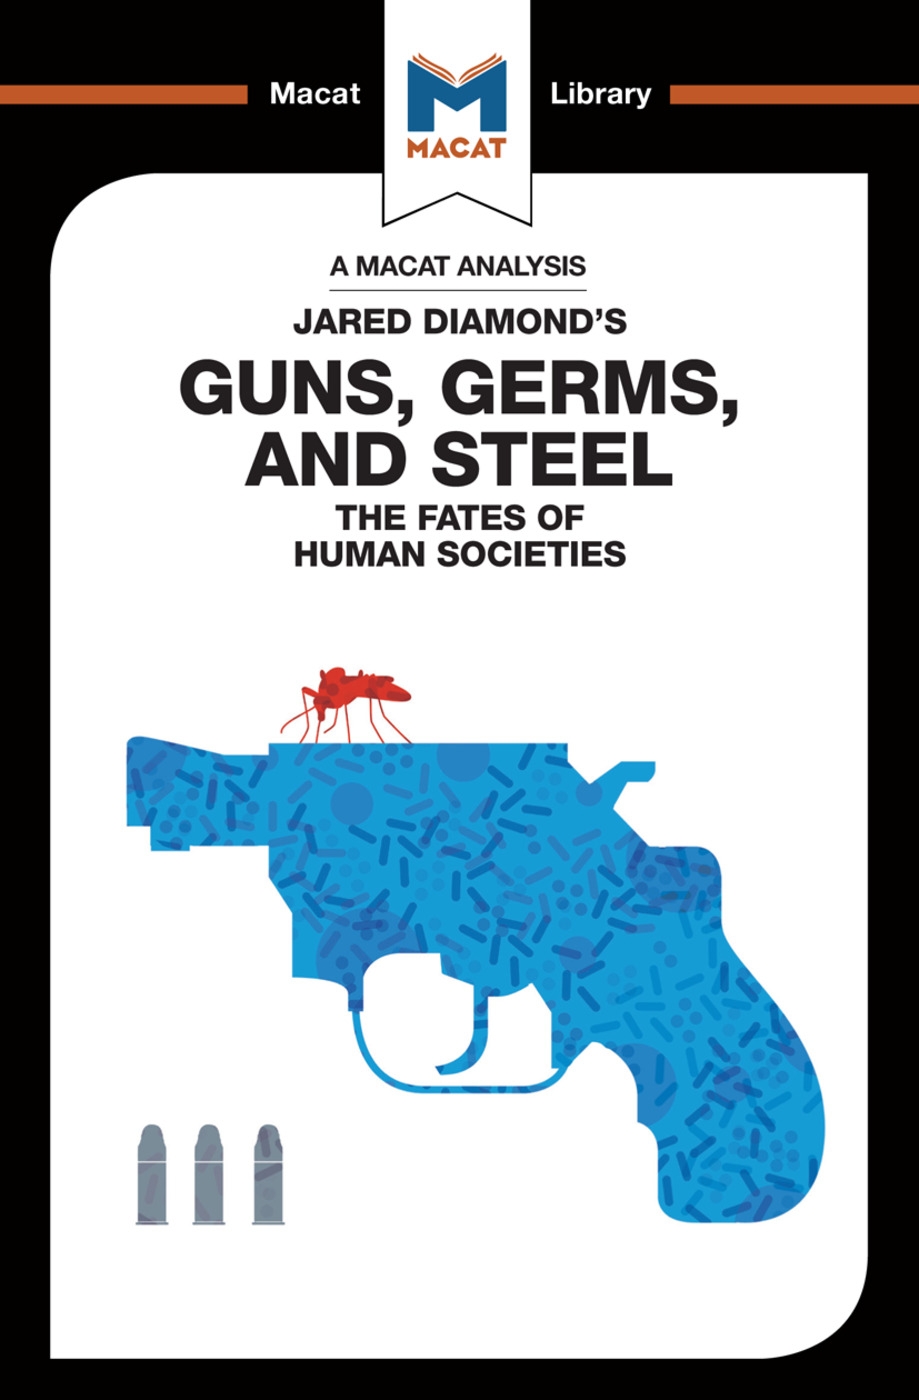 An Analysis of Jared Diamond’s Guns, Germs, and Steel: The Fate of Human Societies